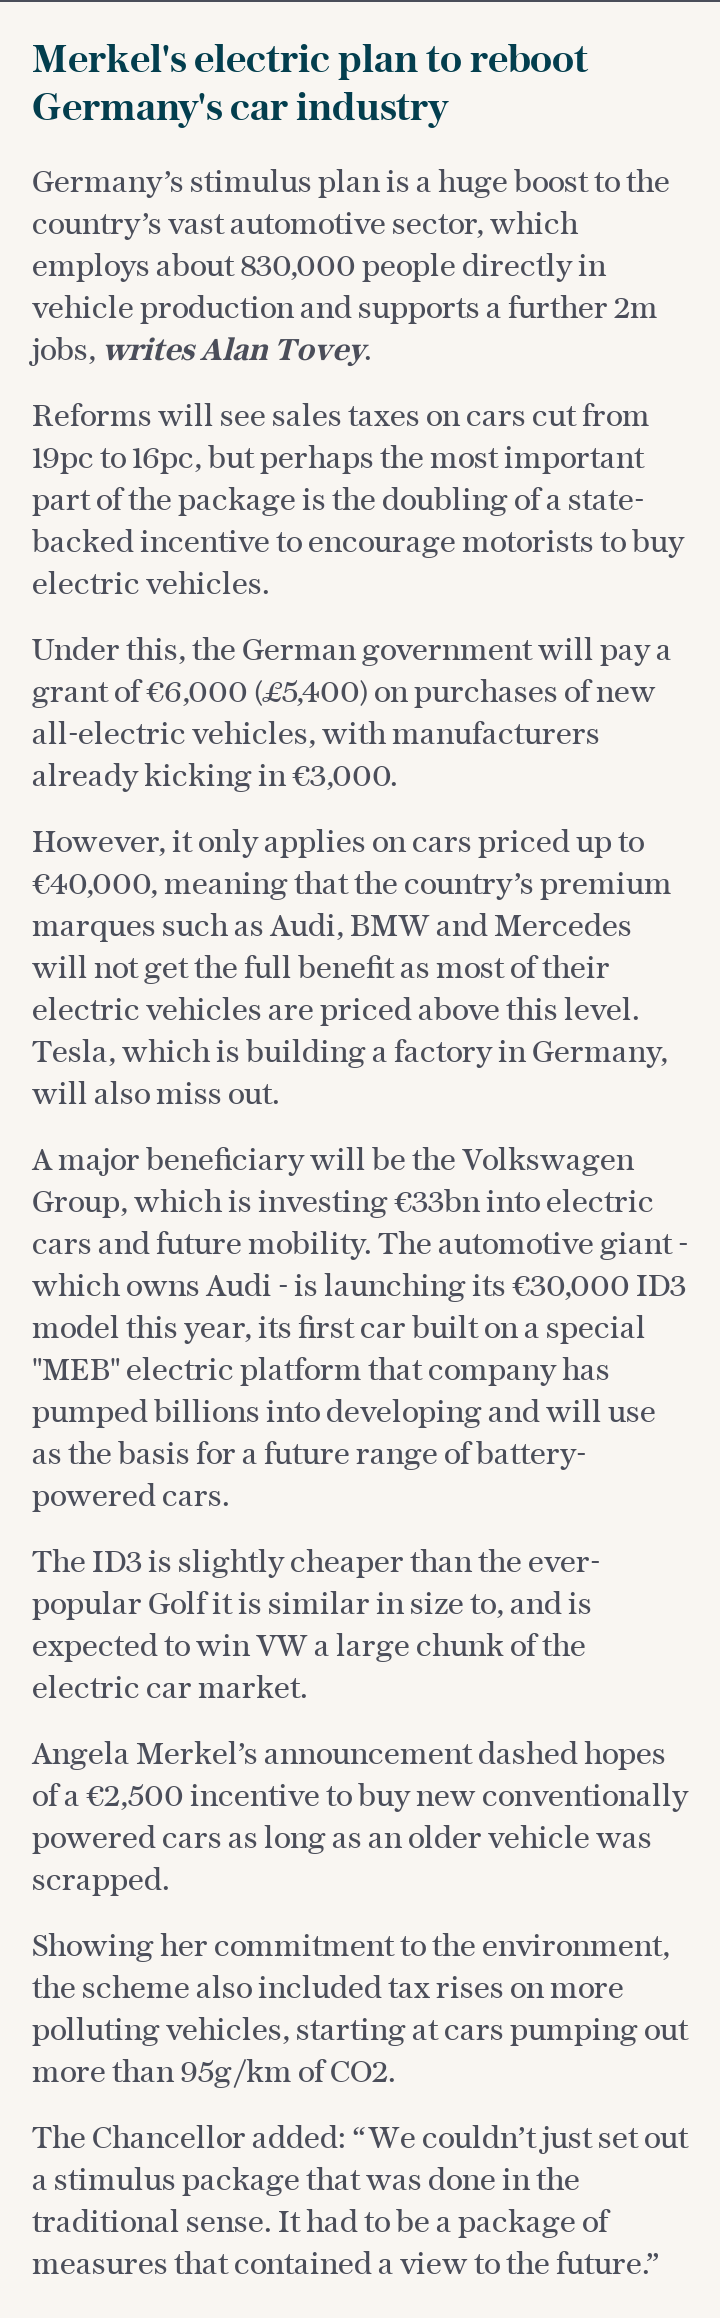 Germany's electric car subsidies